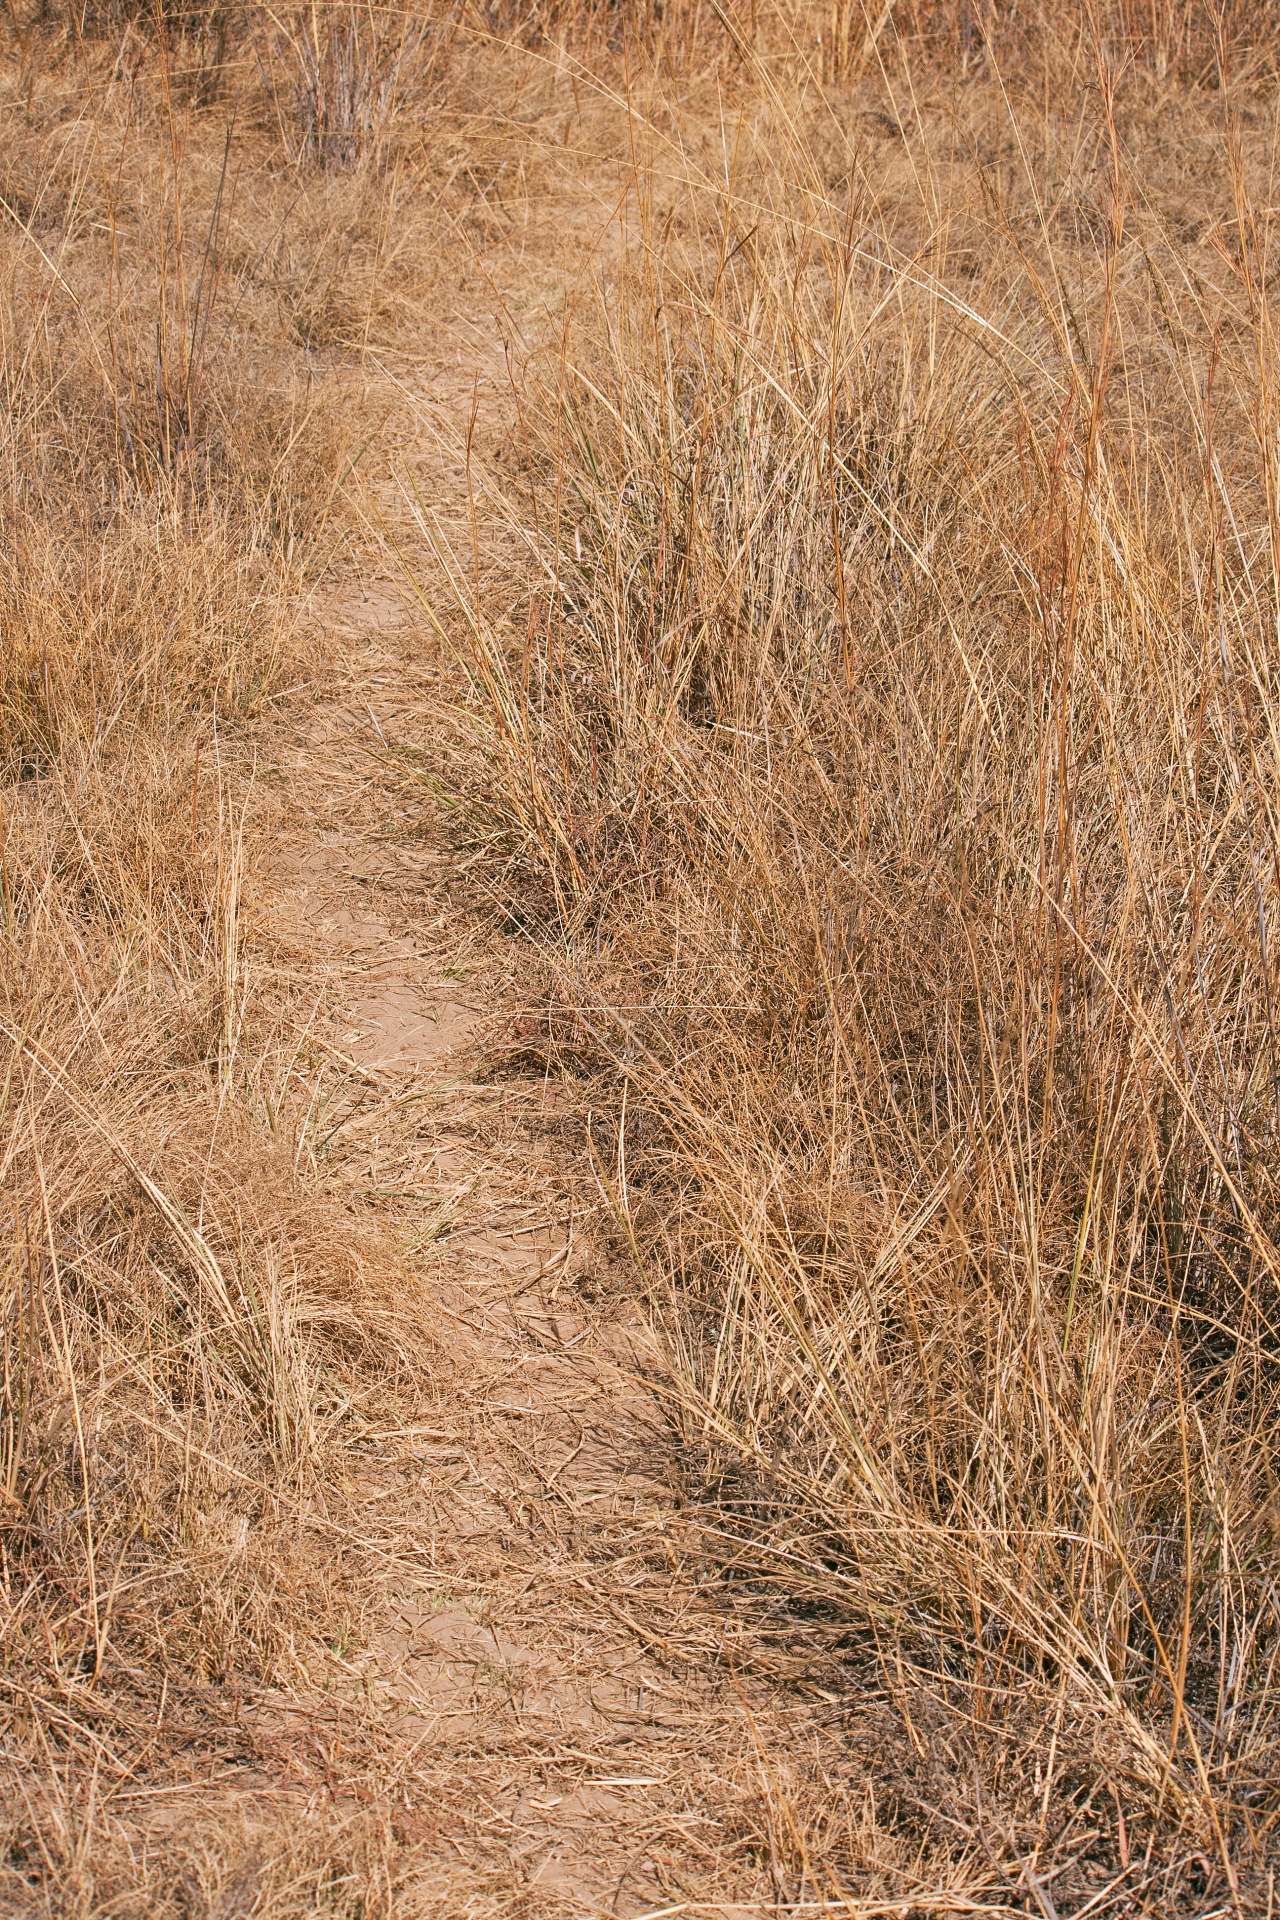 narrow game trail in long wild grass in a south african winter landscape 2